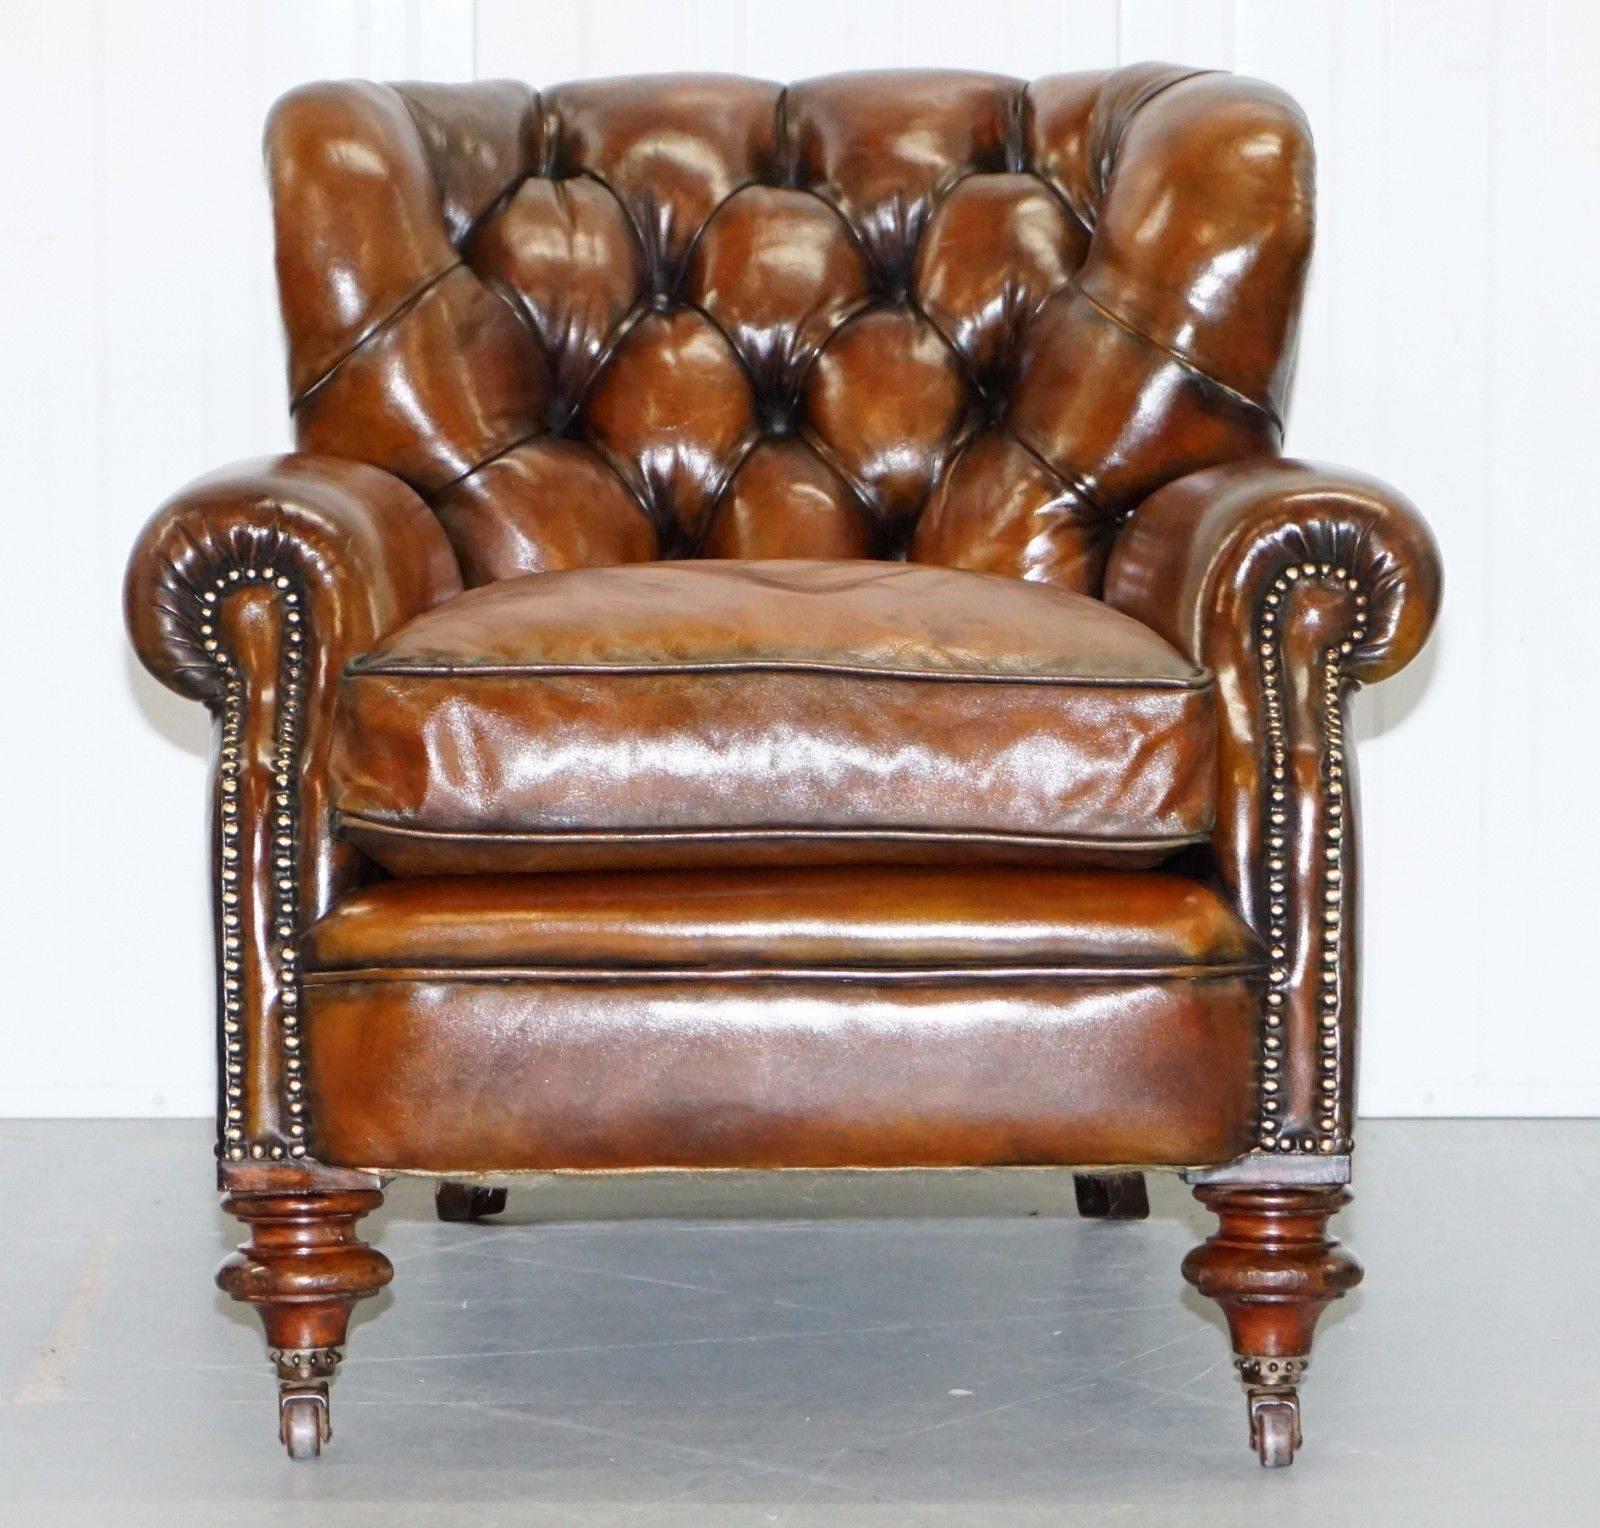 Early Victorian Fully Restored Chesterfield Victorian Club Armchair New Leather Hand Dyed